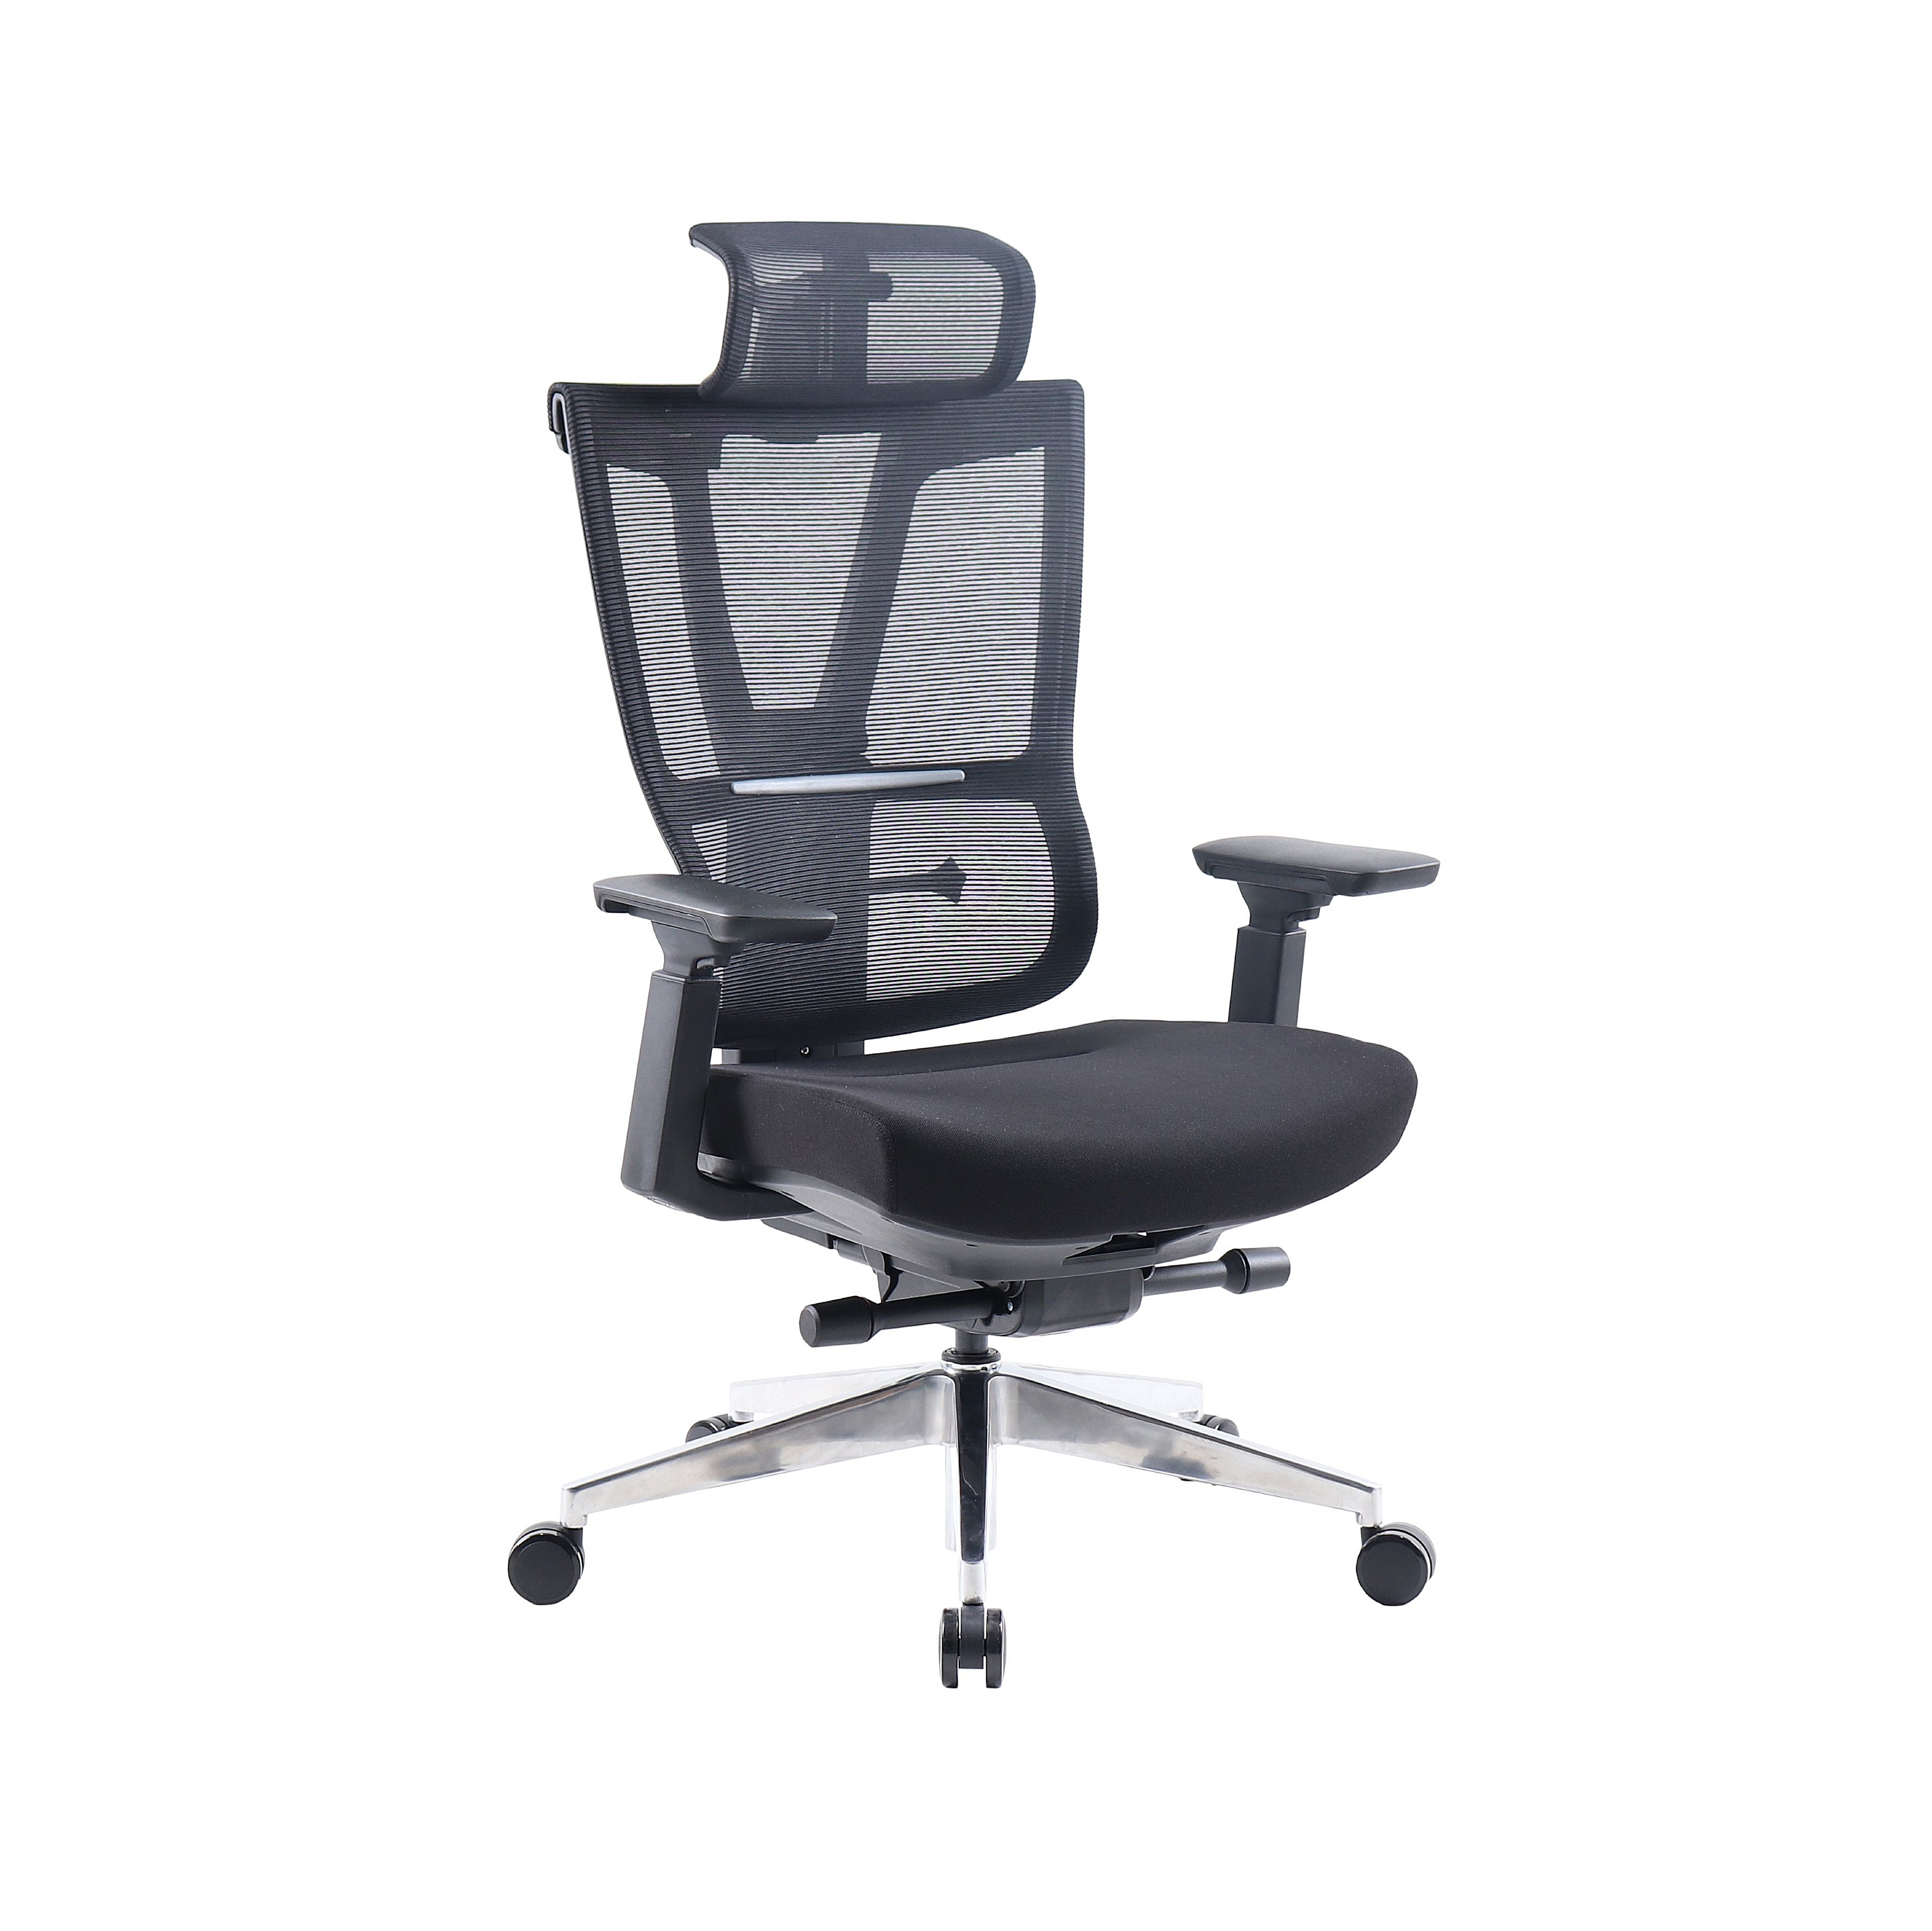 Expert 24/7 Posture Mesh Office Chair from our Mesh Office Chairs range.